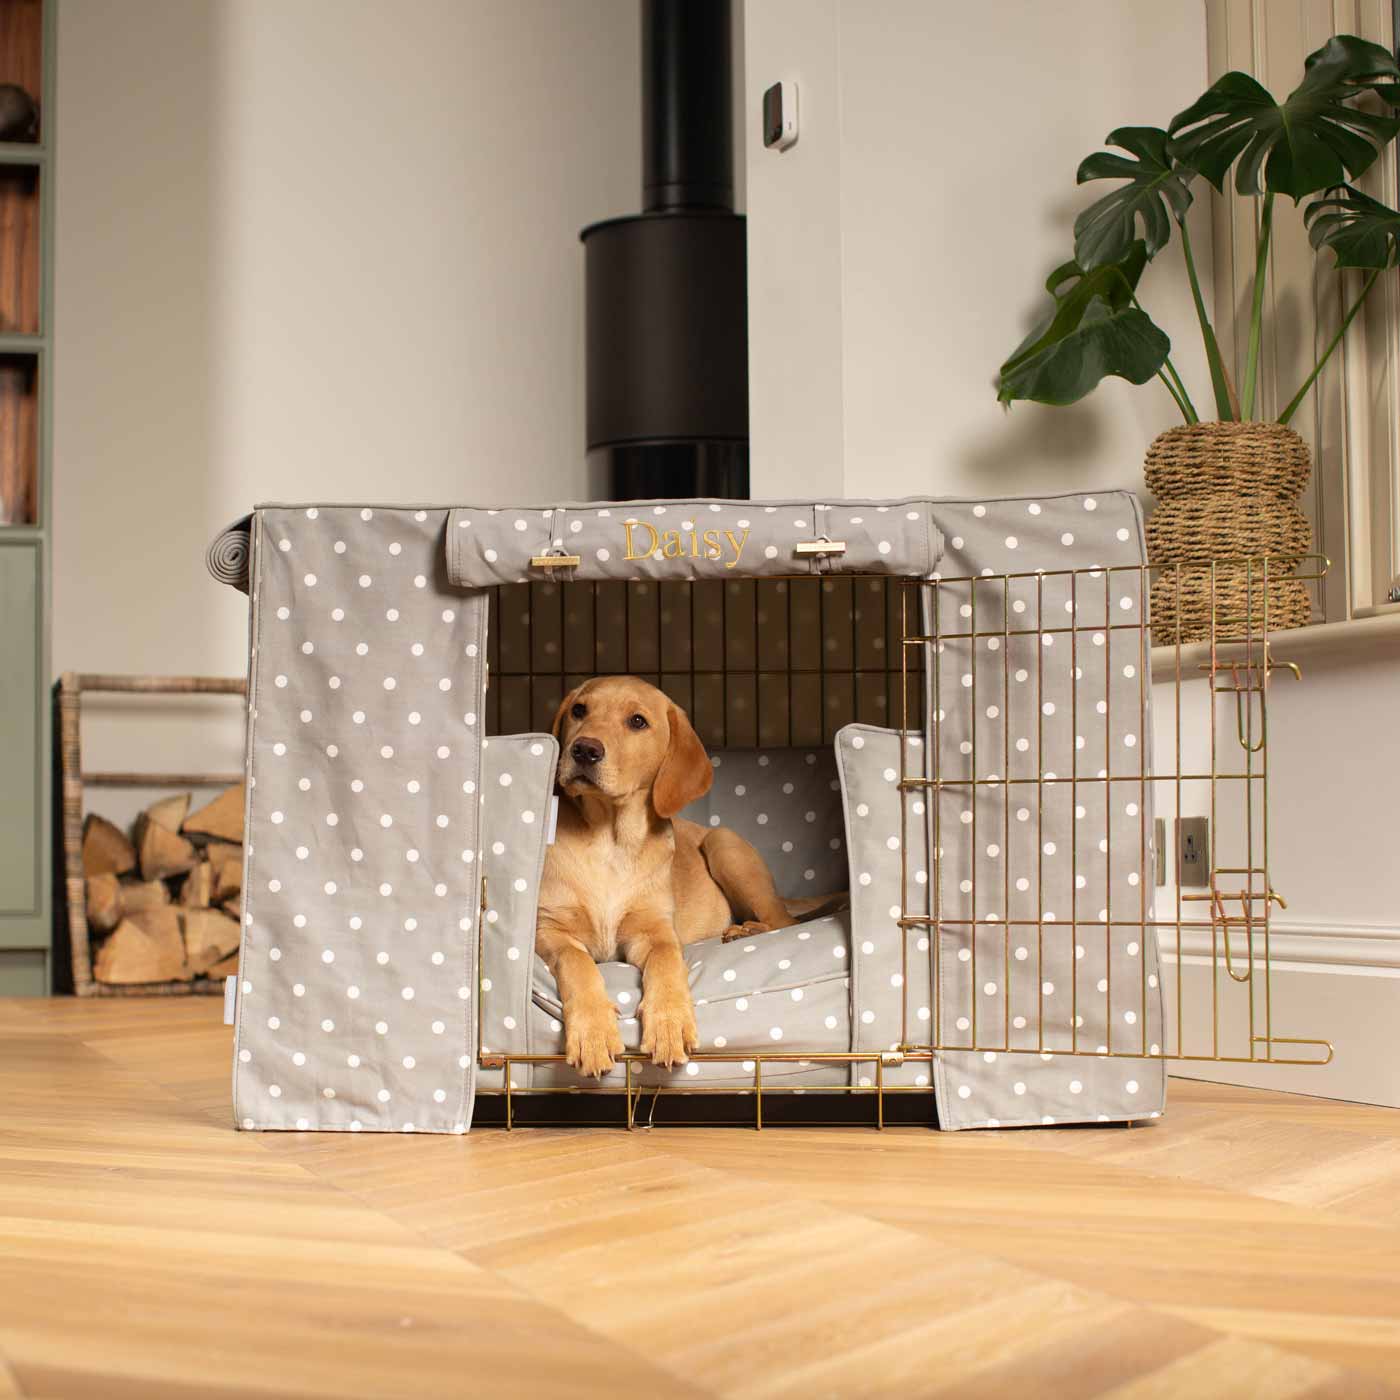 Luxury Gold Dog Cage Set With Cushion, Bumper and Cage Cover. The Perfect Dog Cage For The Ultimate Naptime, Available Now at Lords & Labradors US